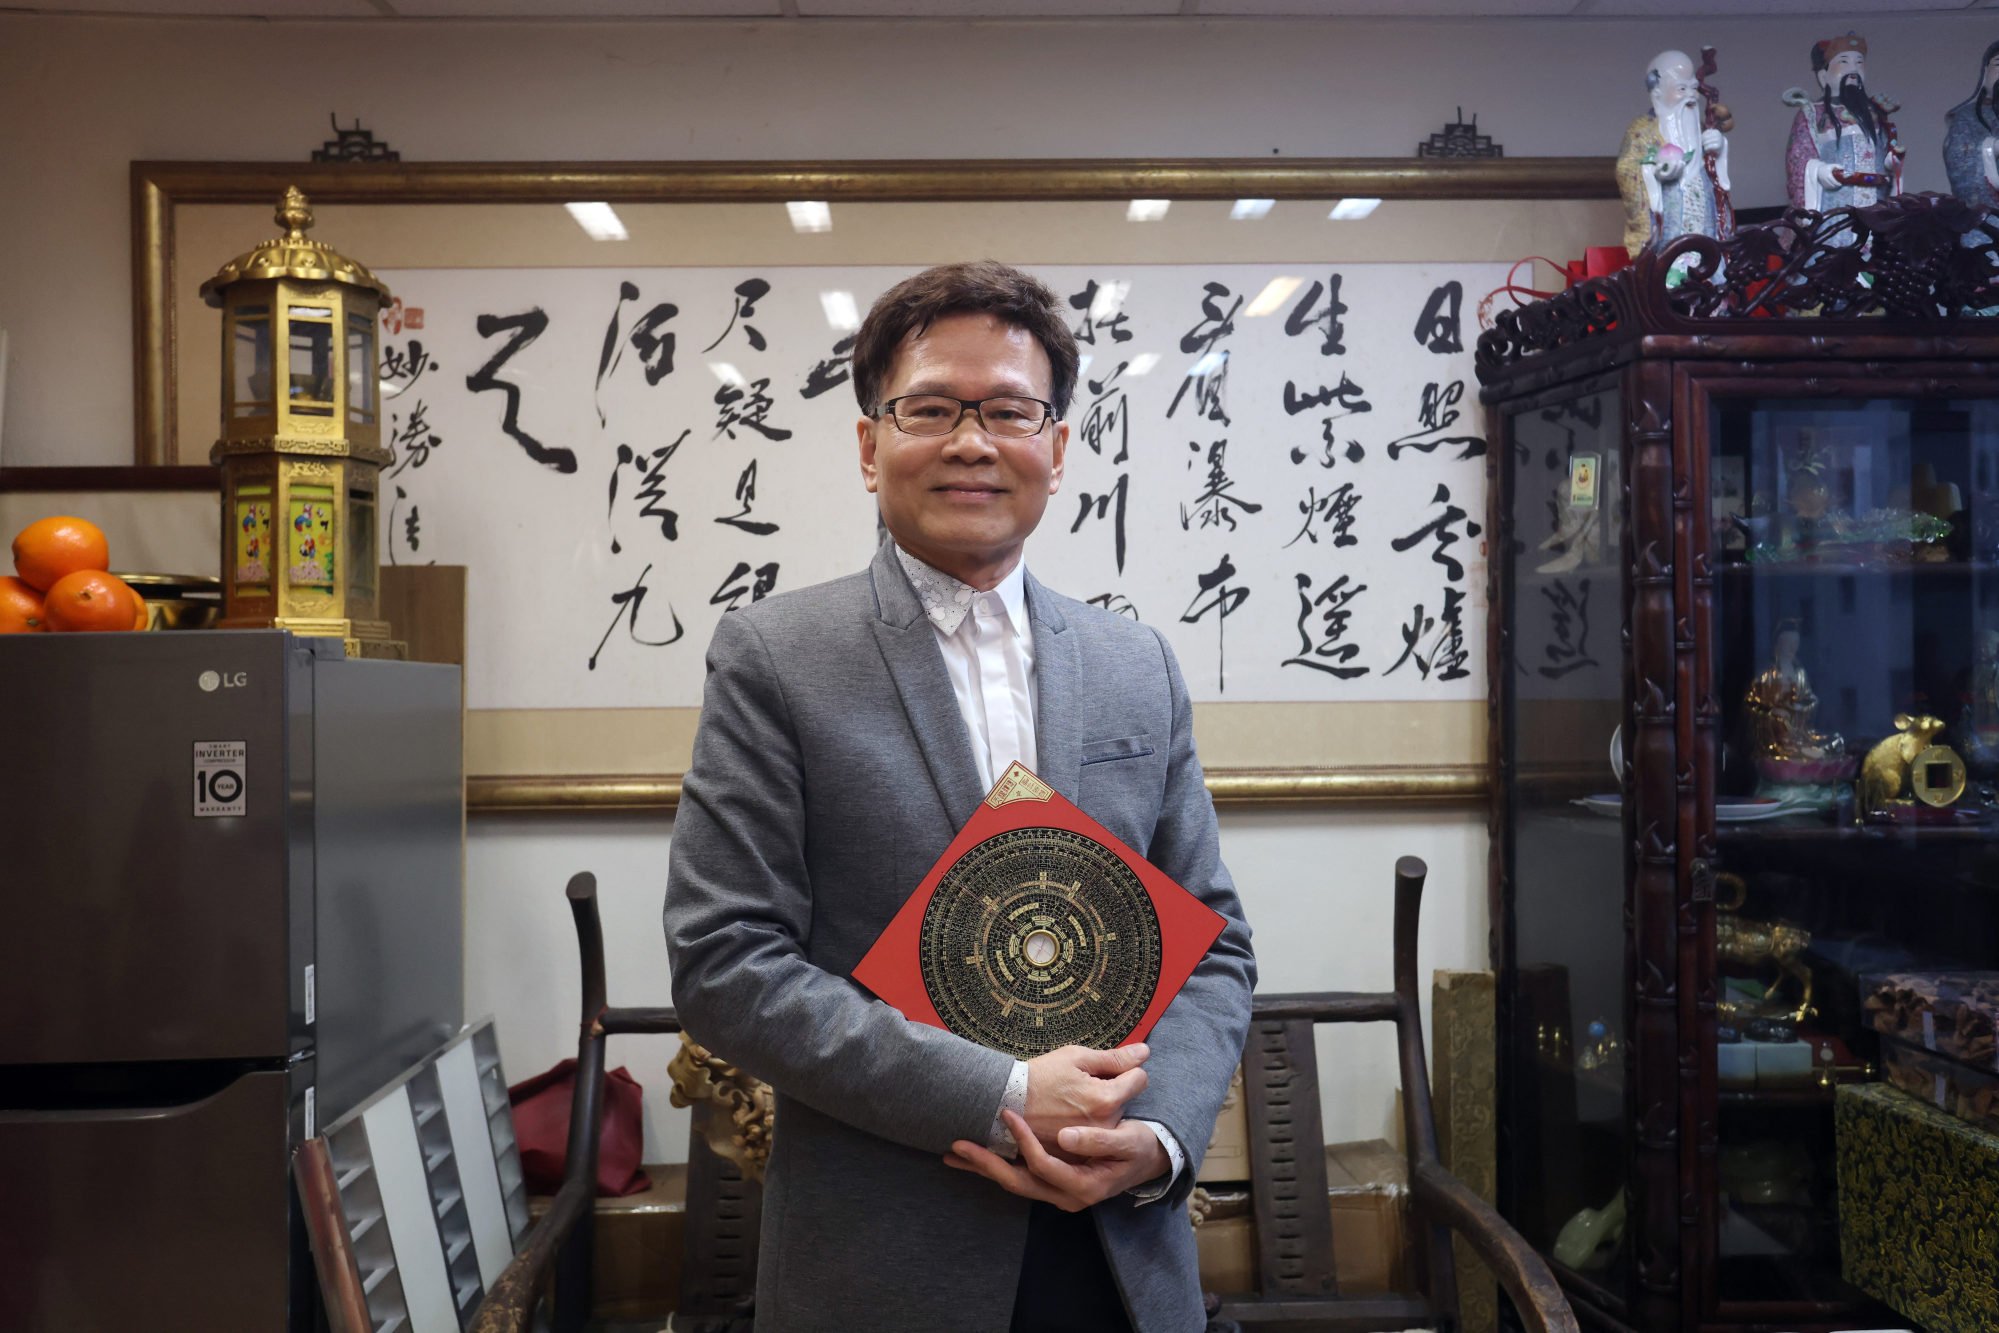 Feng shui master Chow Hon-ming says those in jobs with a fiery quality could prosper in the new year. Photo: Jonathan Wong